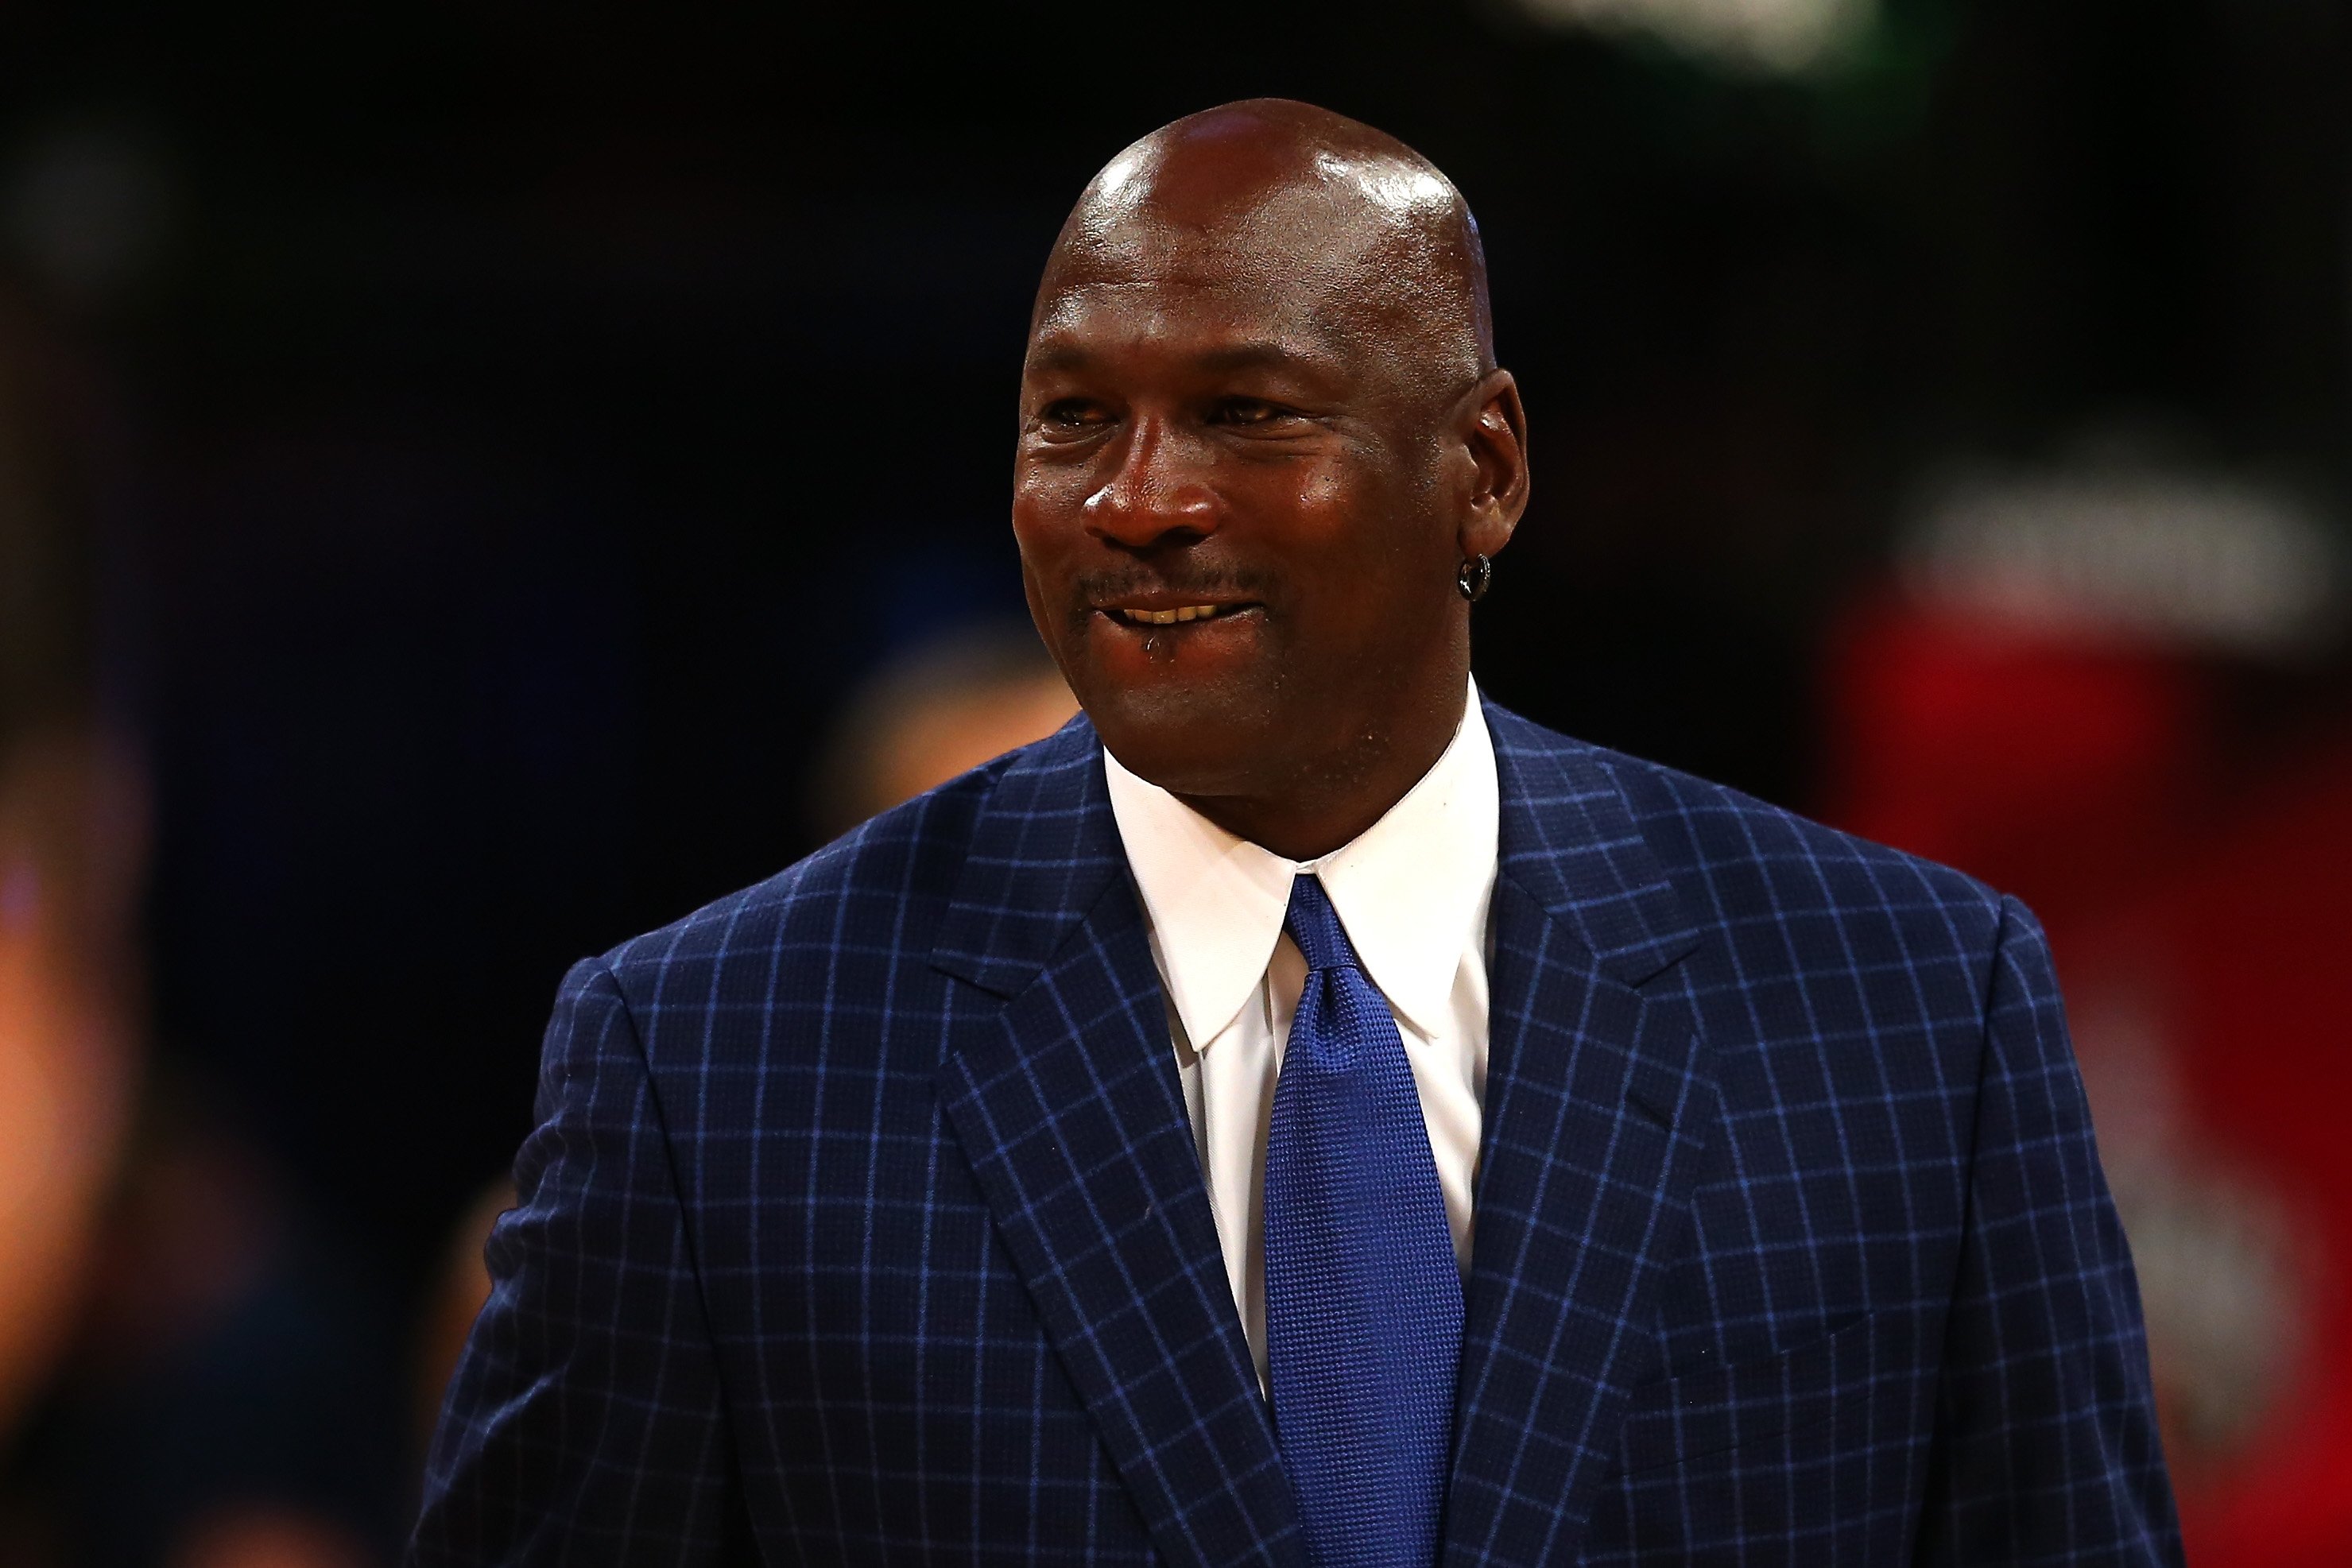 Michael Jordan walks off the court during the NBA All-Star Game 2016 at the Air Canada Center on February 14, 2016. | Photo: Getty Images